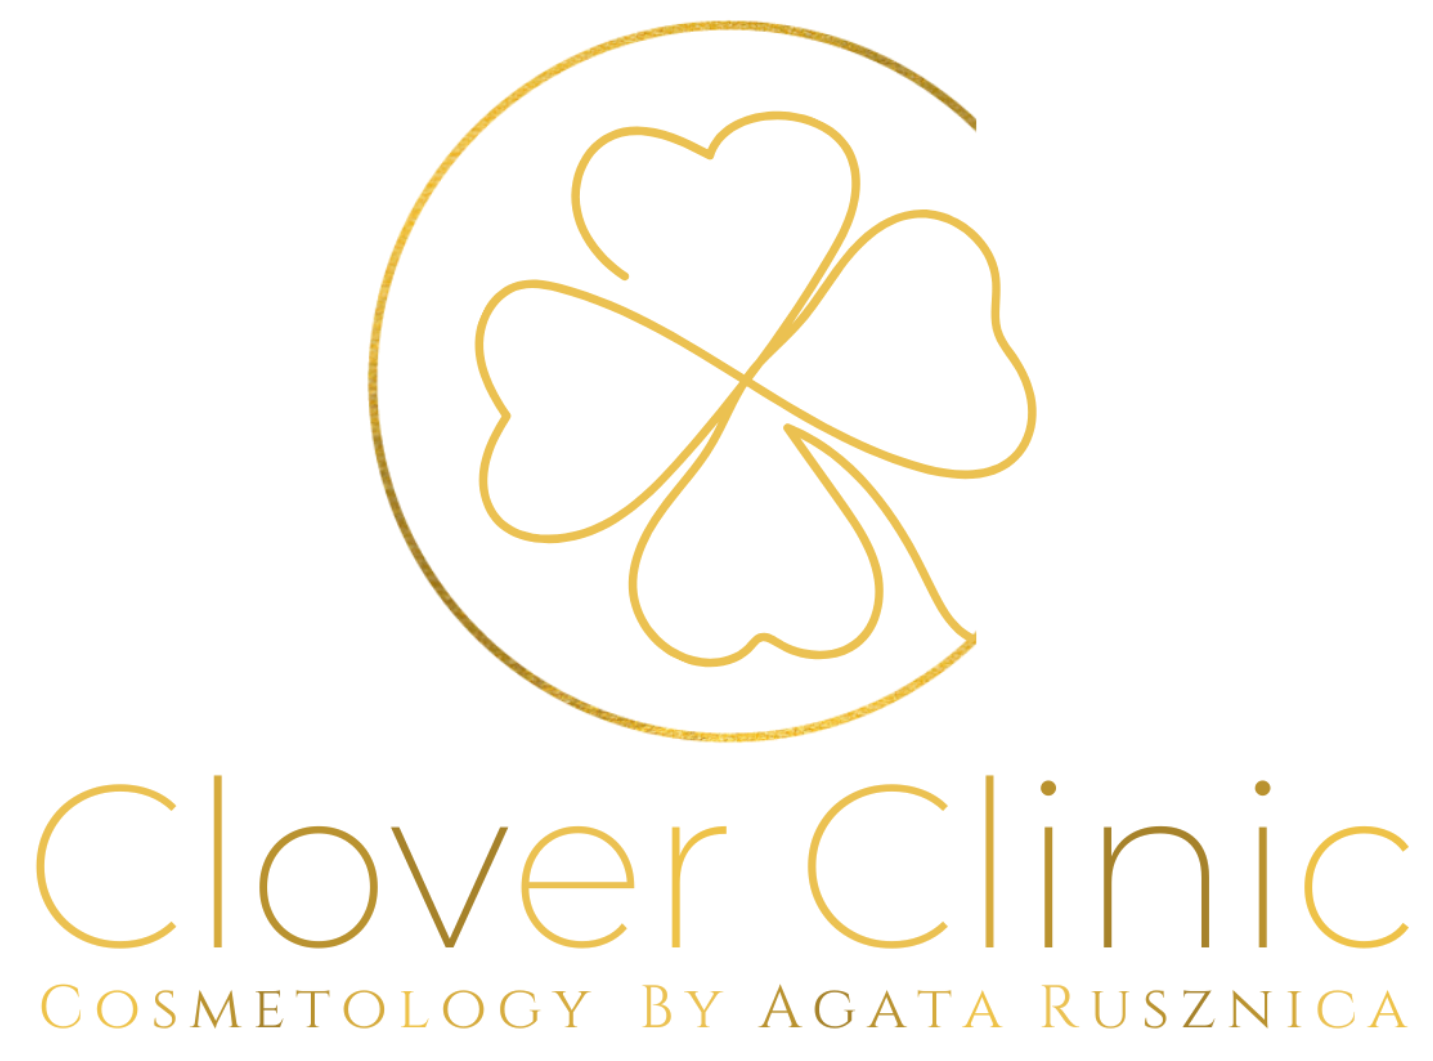 Clover Clinic Cosmetology by Agata Rusznica